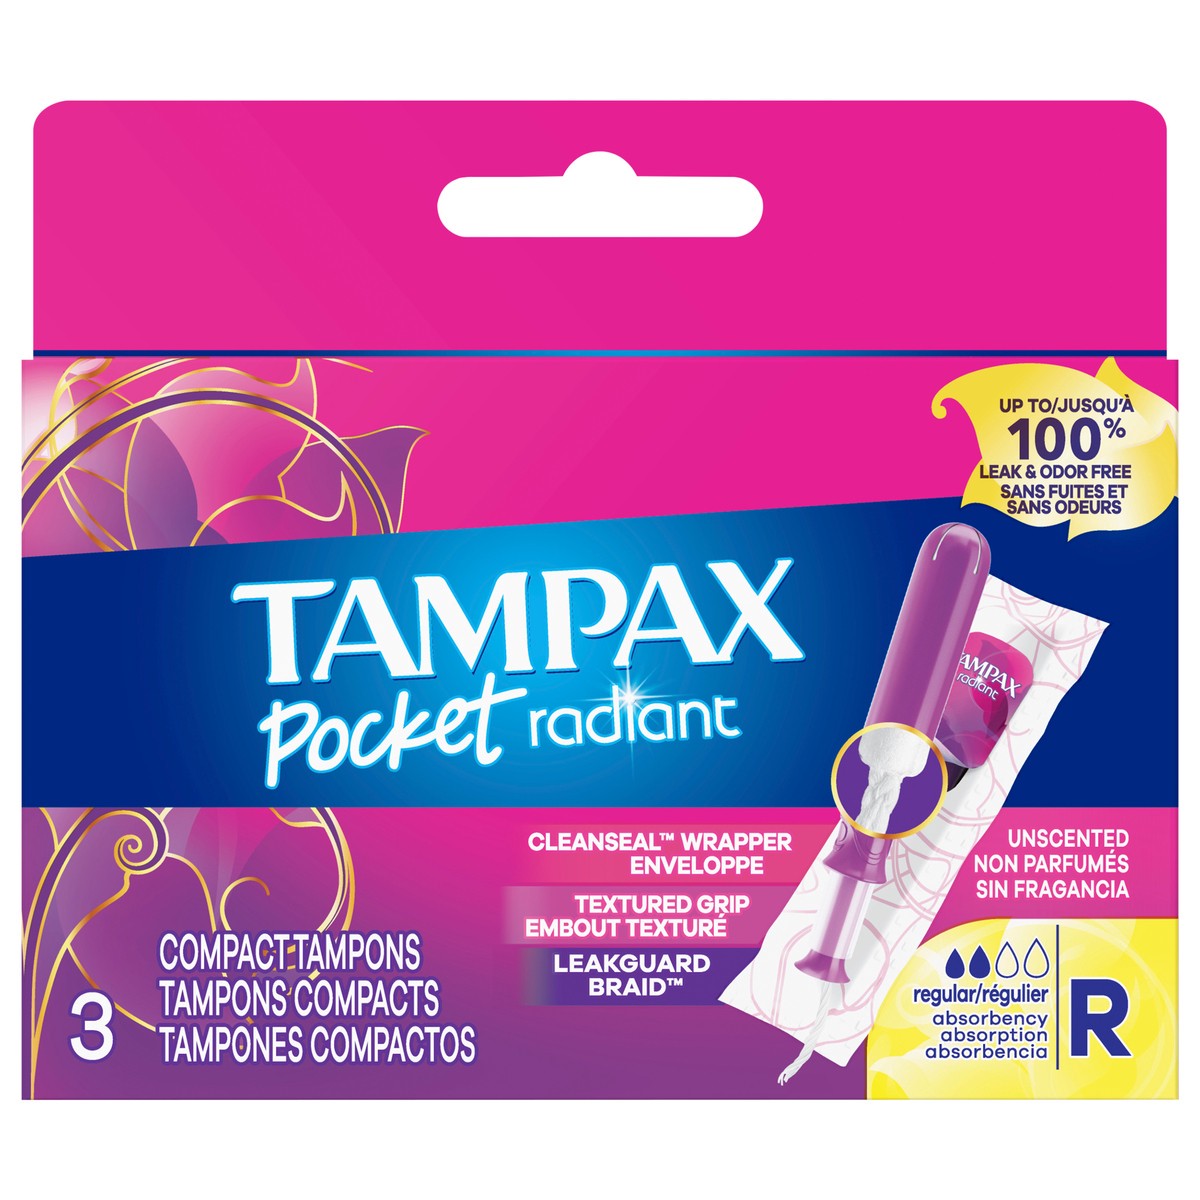 slide 7 of 7, Tampax Pocket Radiant Compact Plastic Tampons, With LeakGuard Braid, Regular Absorbency, Unscented, 3 Count, 3 ct